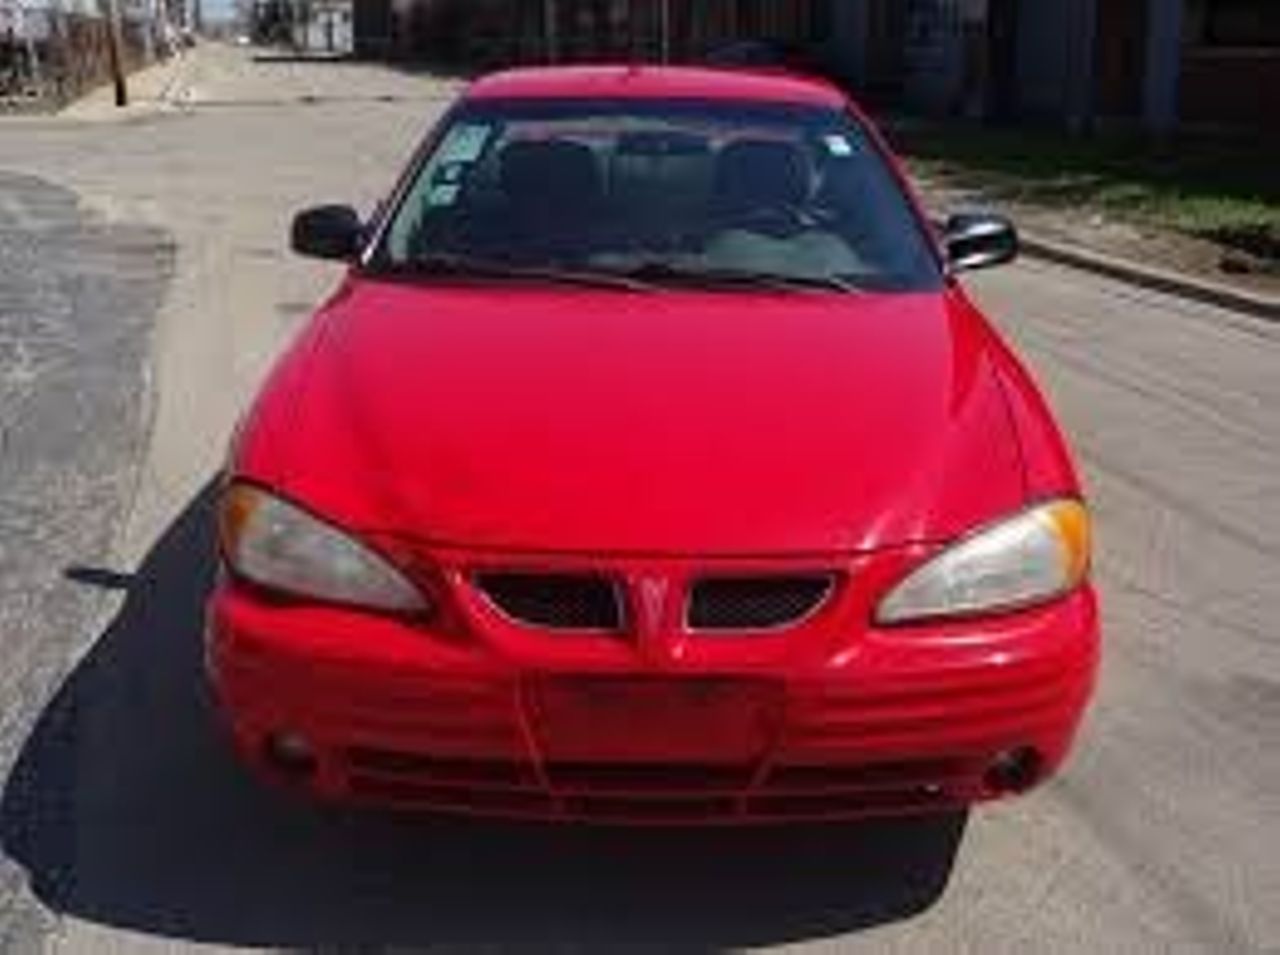 2001 Pontiac Grand Am | Sioux Falls, SD, Bright Red (Red & Orange), Front Wheel